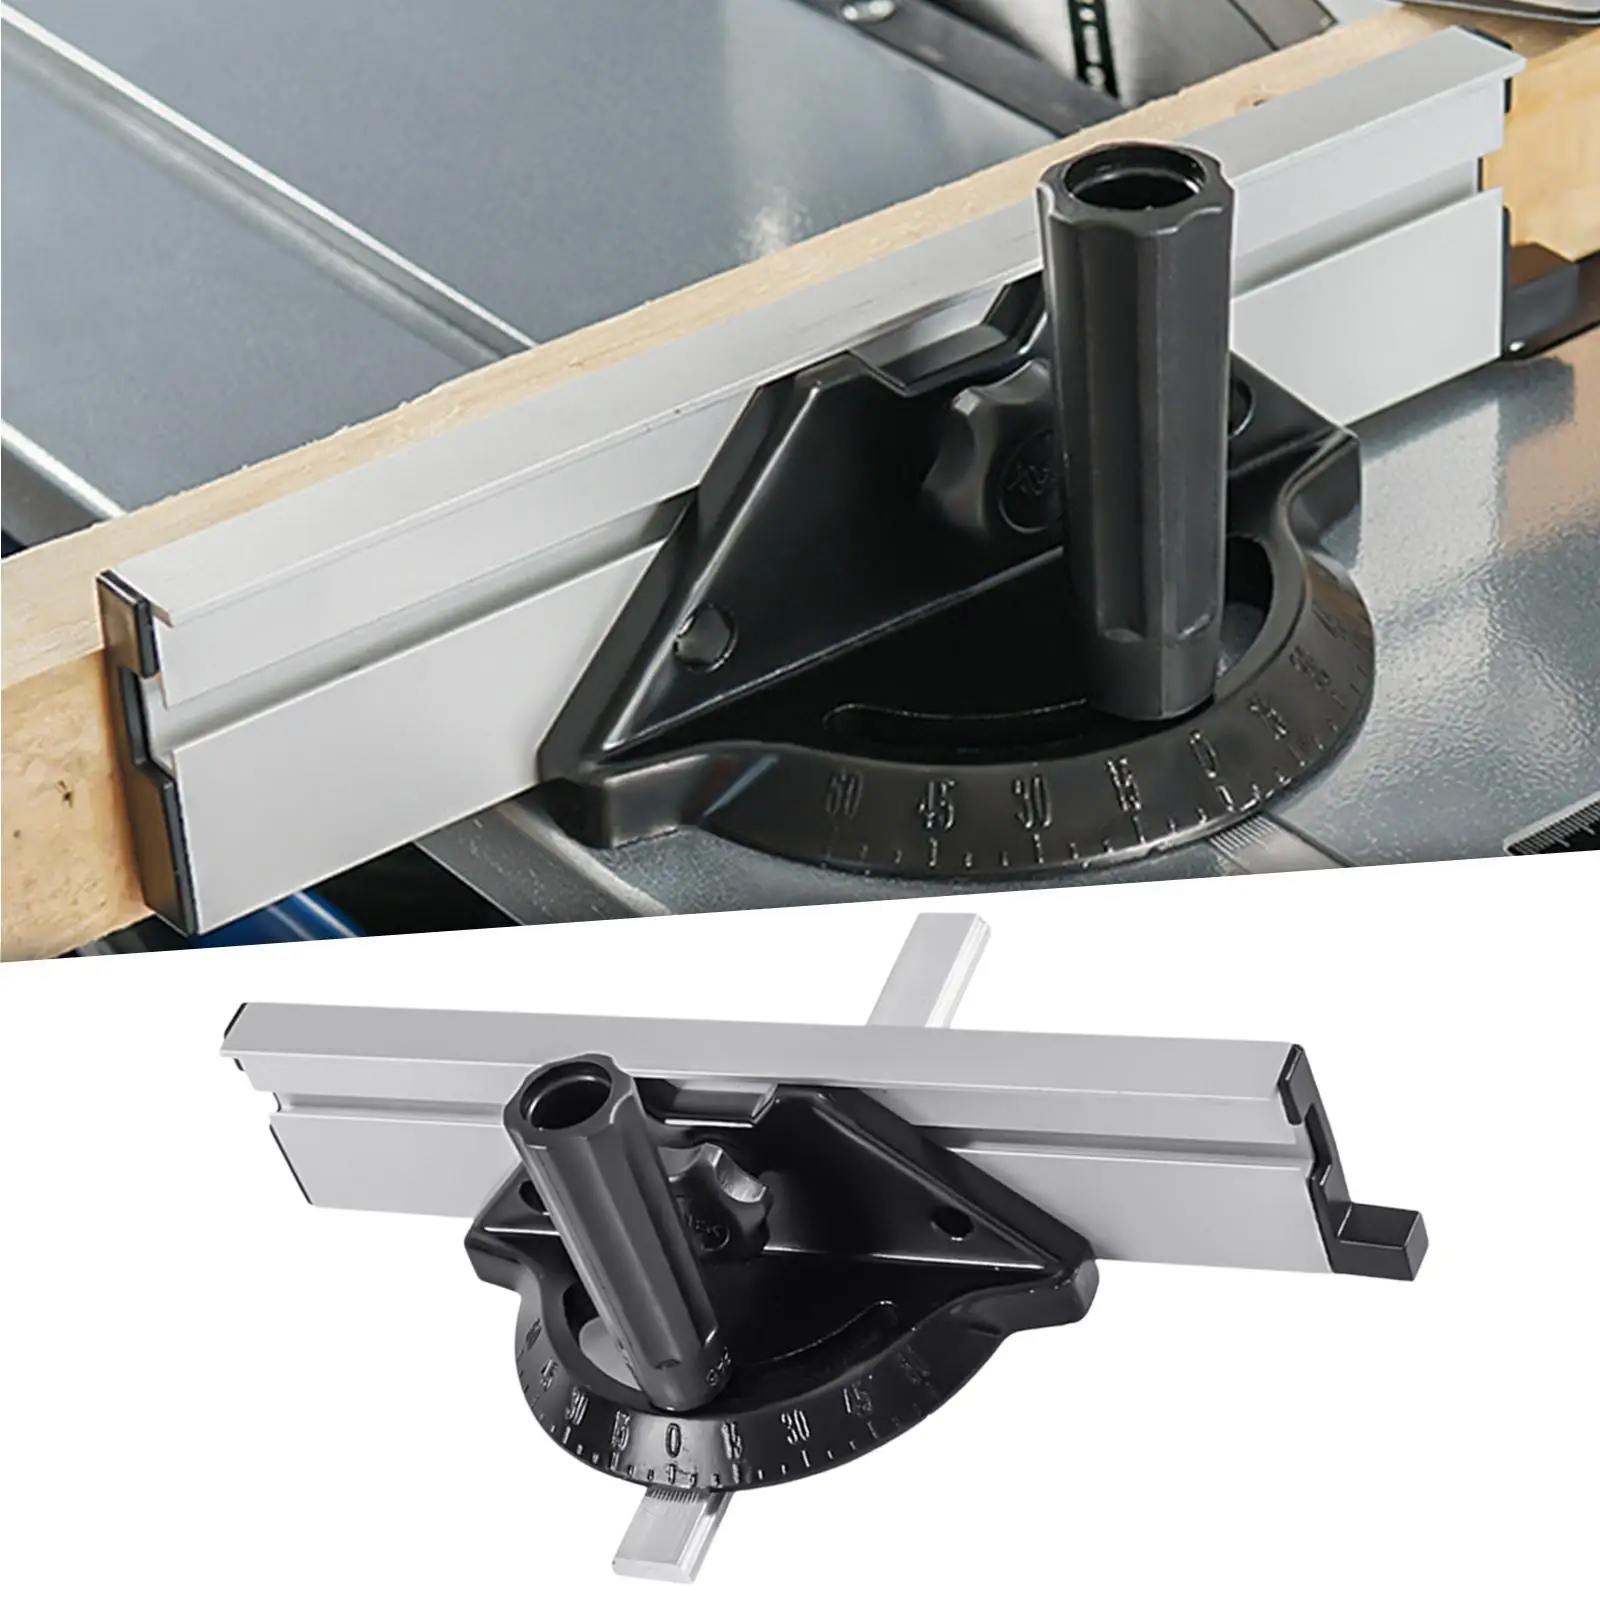 Miter Gauge Fence System ,Accurate Measurement with Repetitive Cut  for Router Table,Jointers